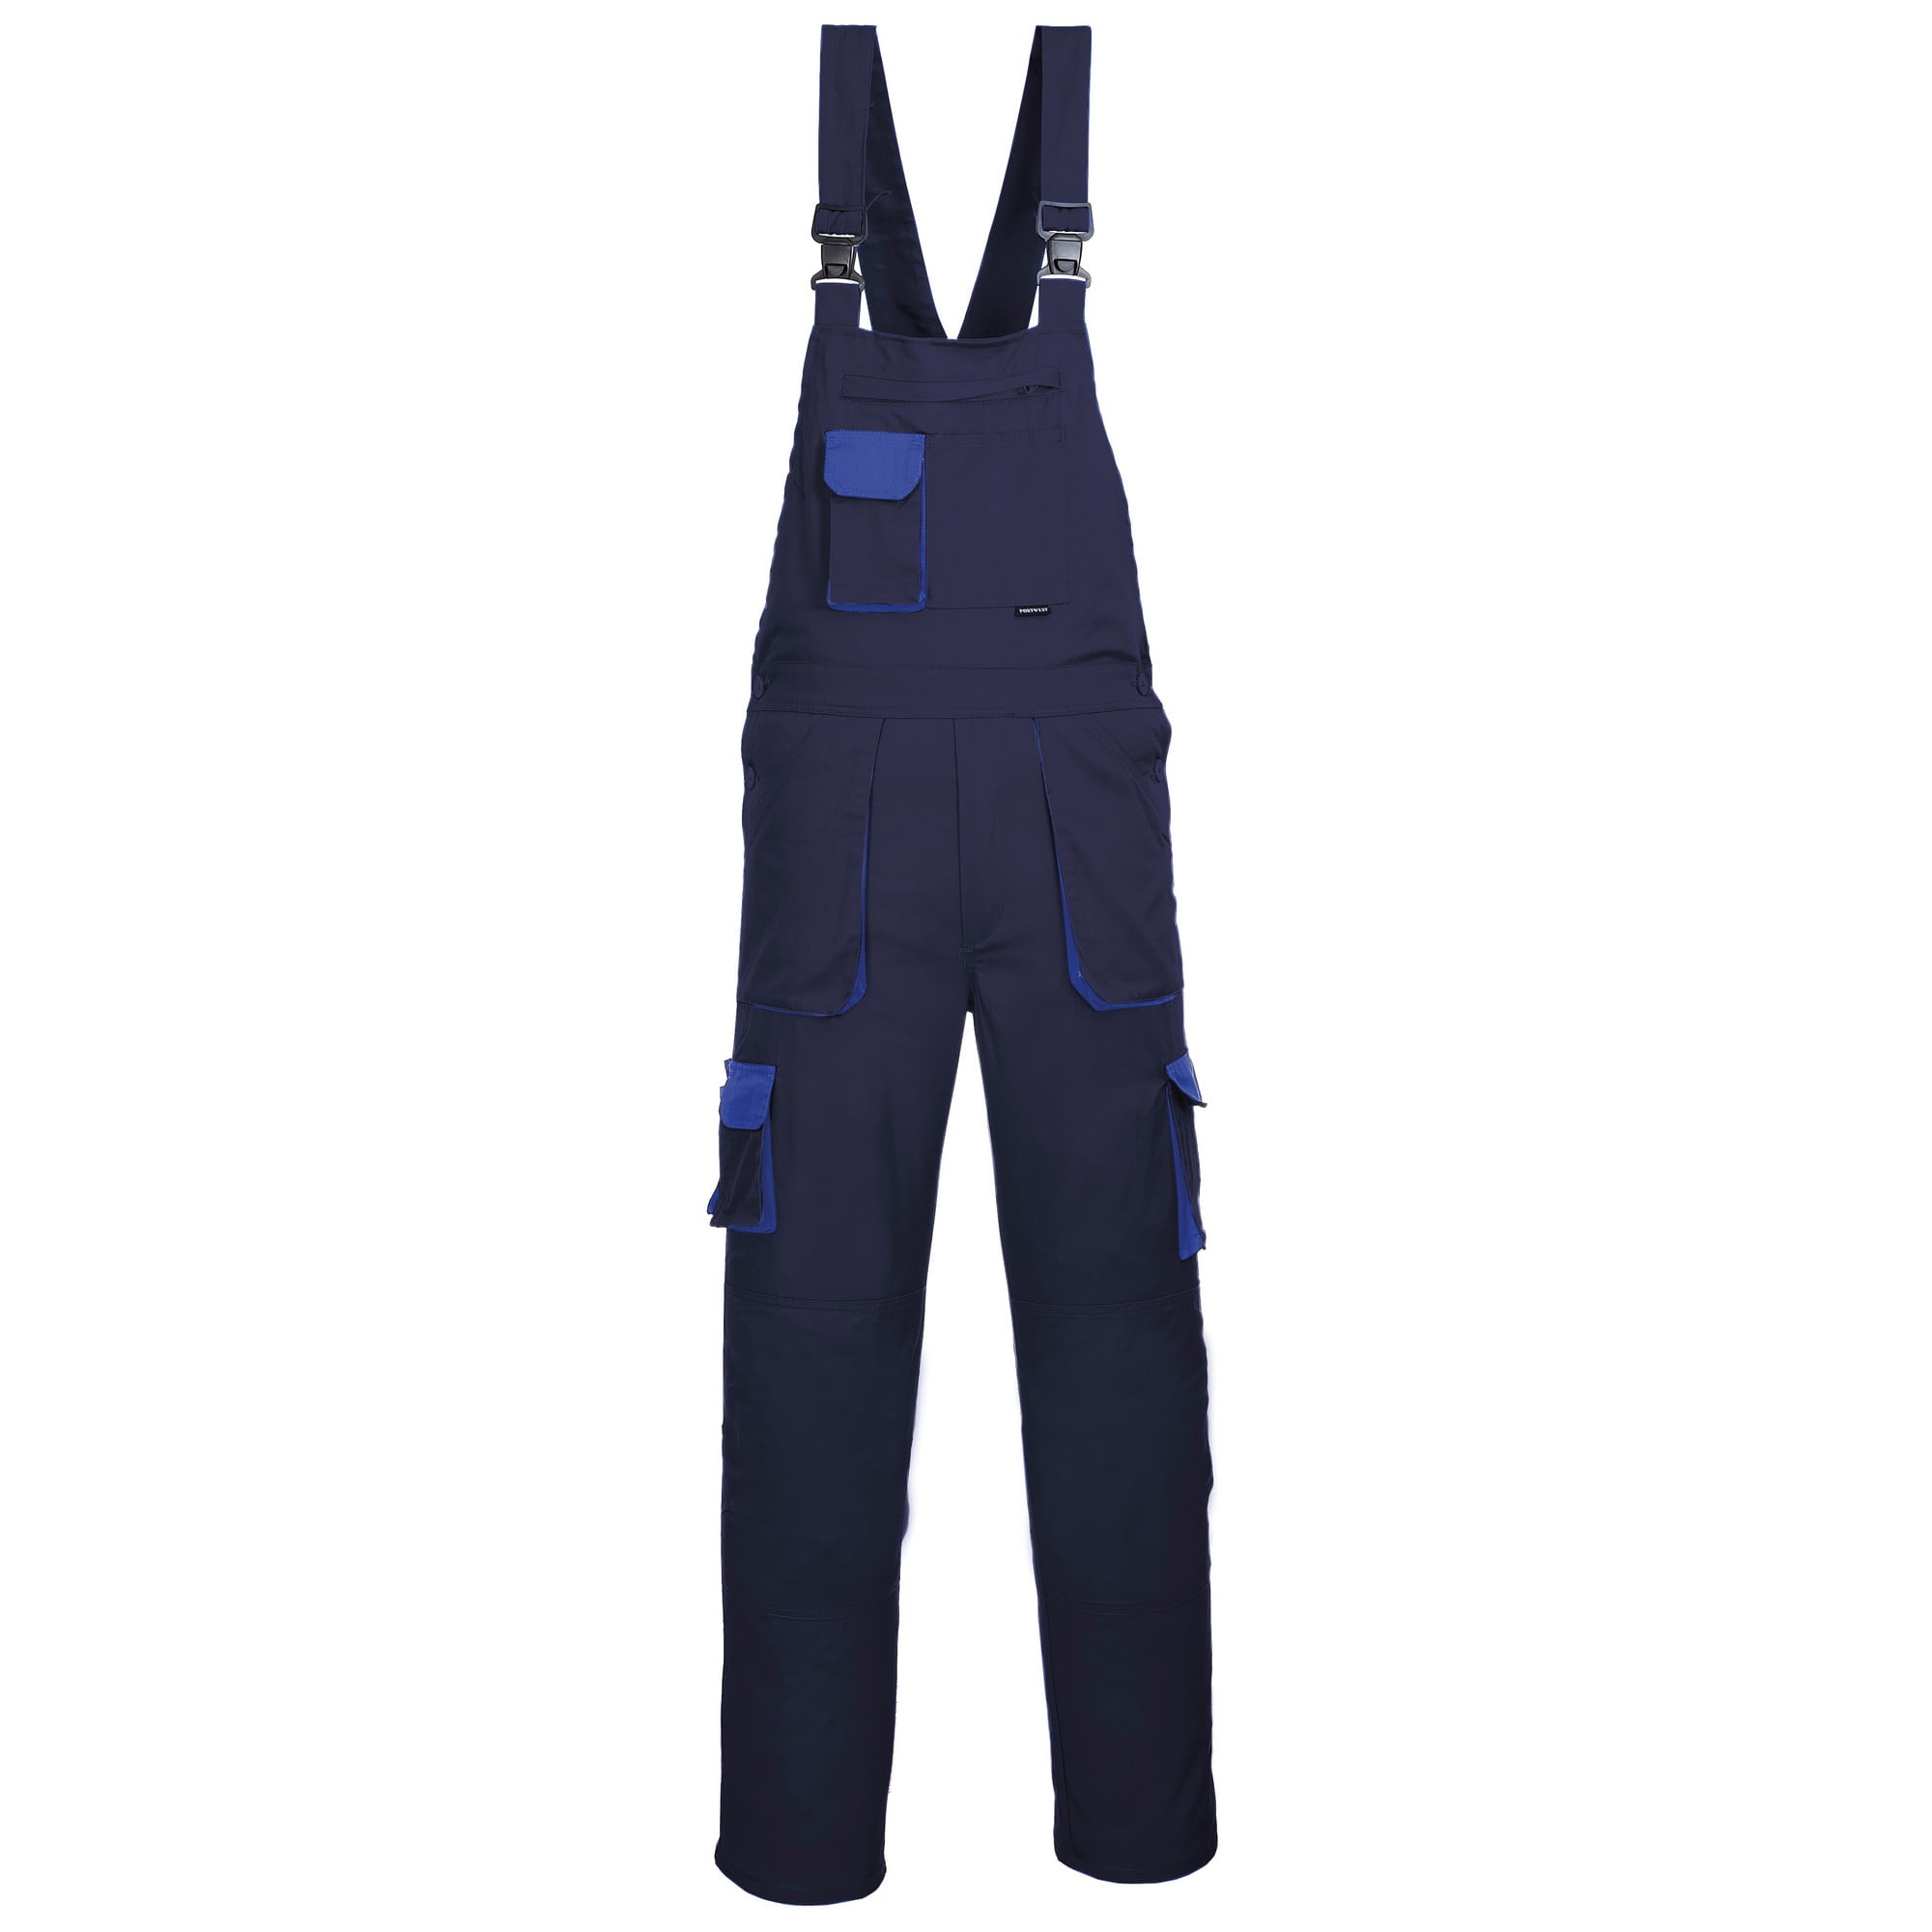 Hi Vis Contrast Bibs and Braces Genuine Overall Workwear FREE Knee-Pads Portwest 